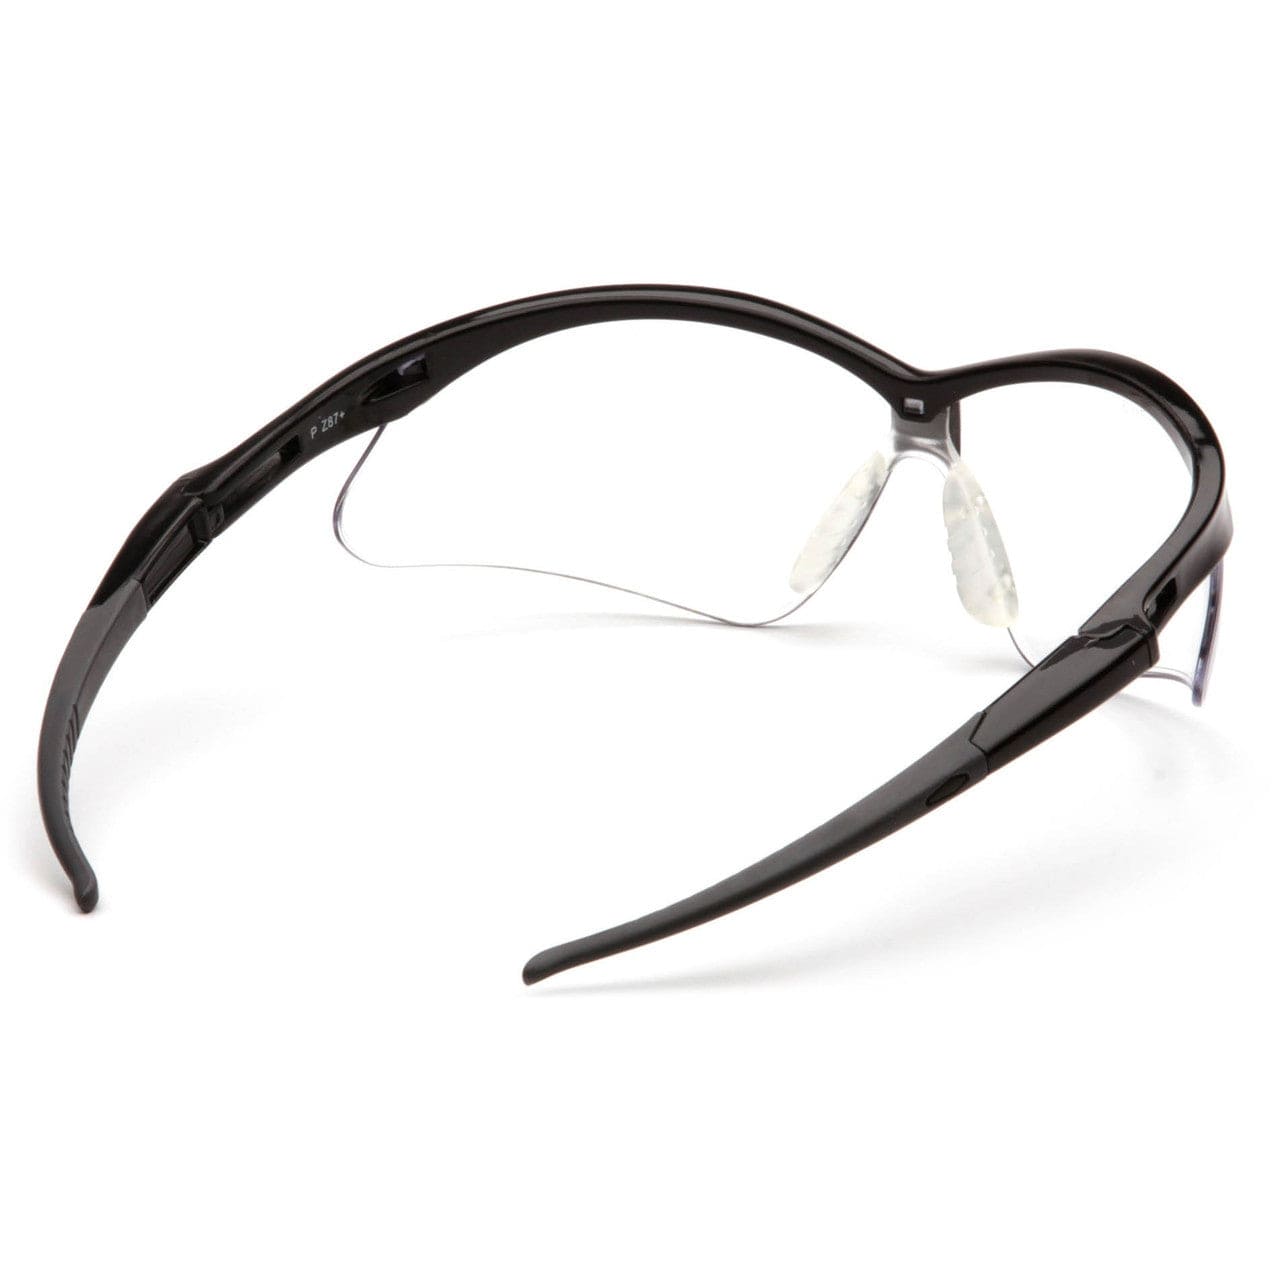 Pyramex PMXtreme Safety Glasses with Black Frame and Clear Anti-Fog Lens Inside